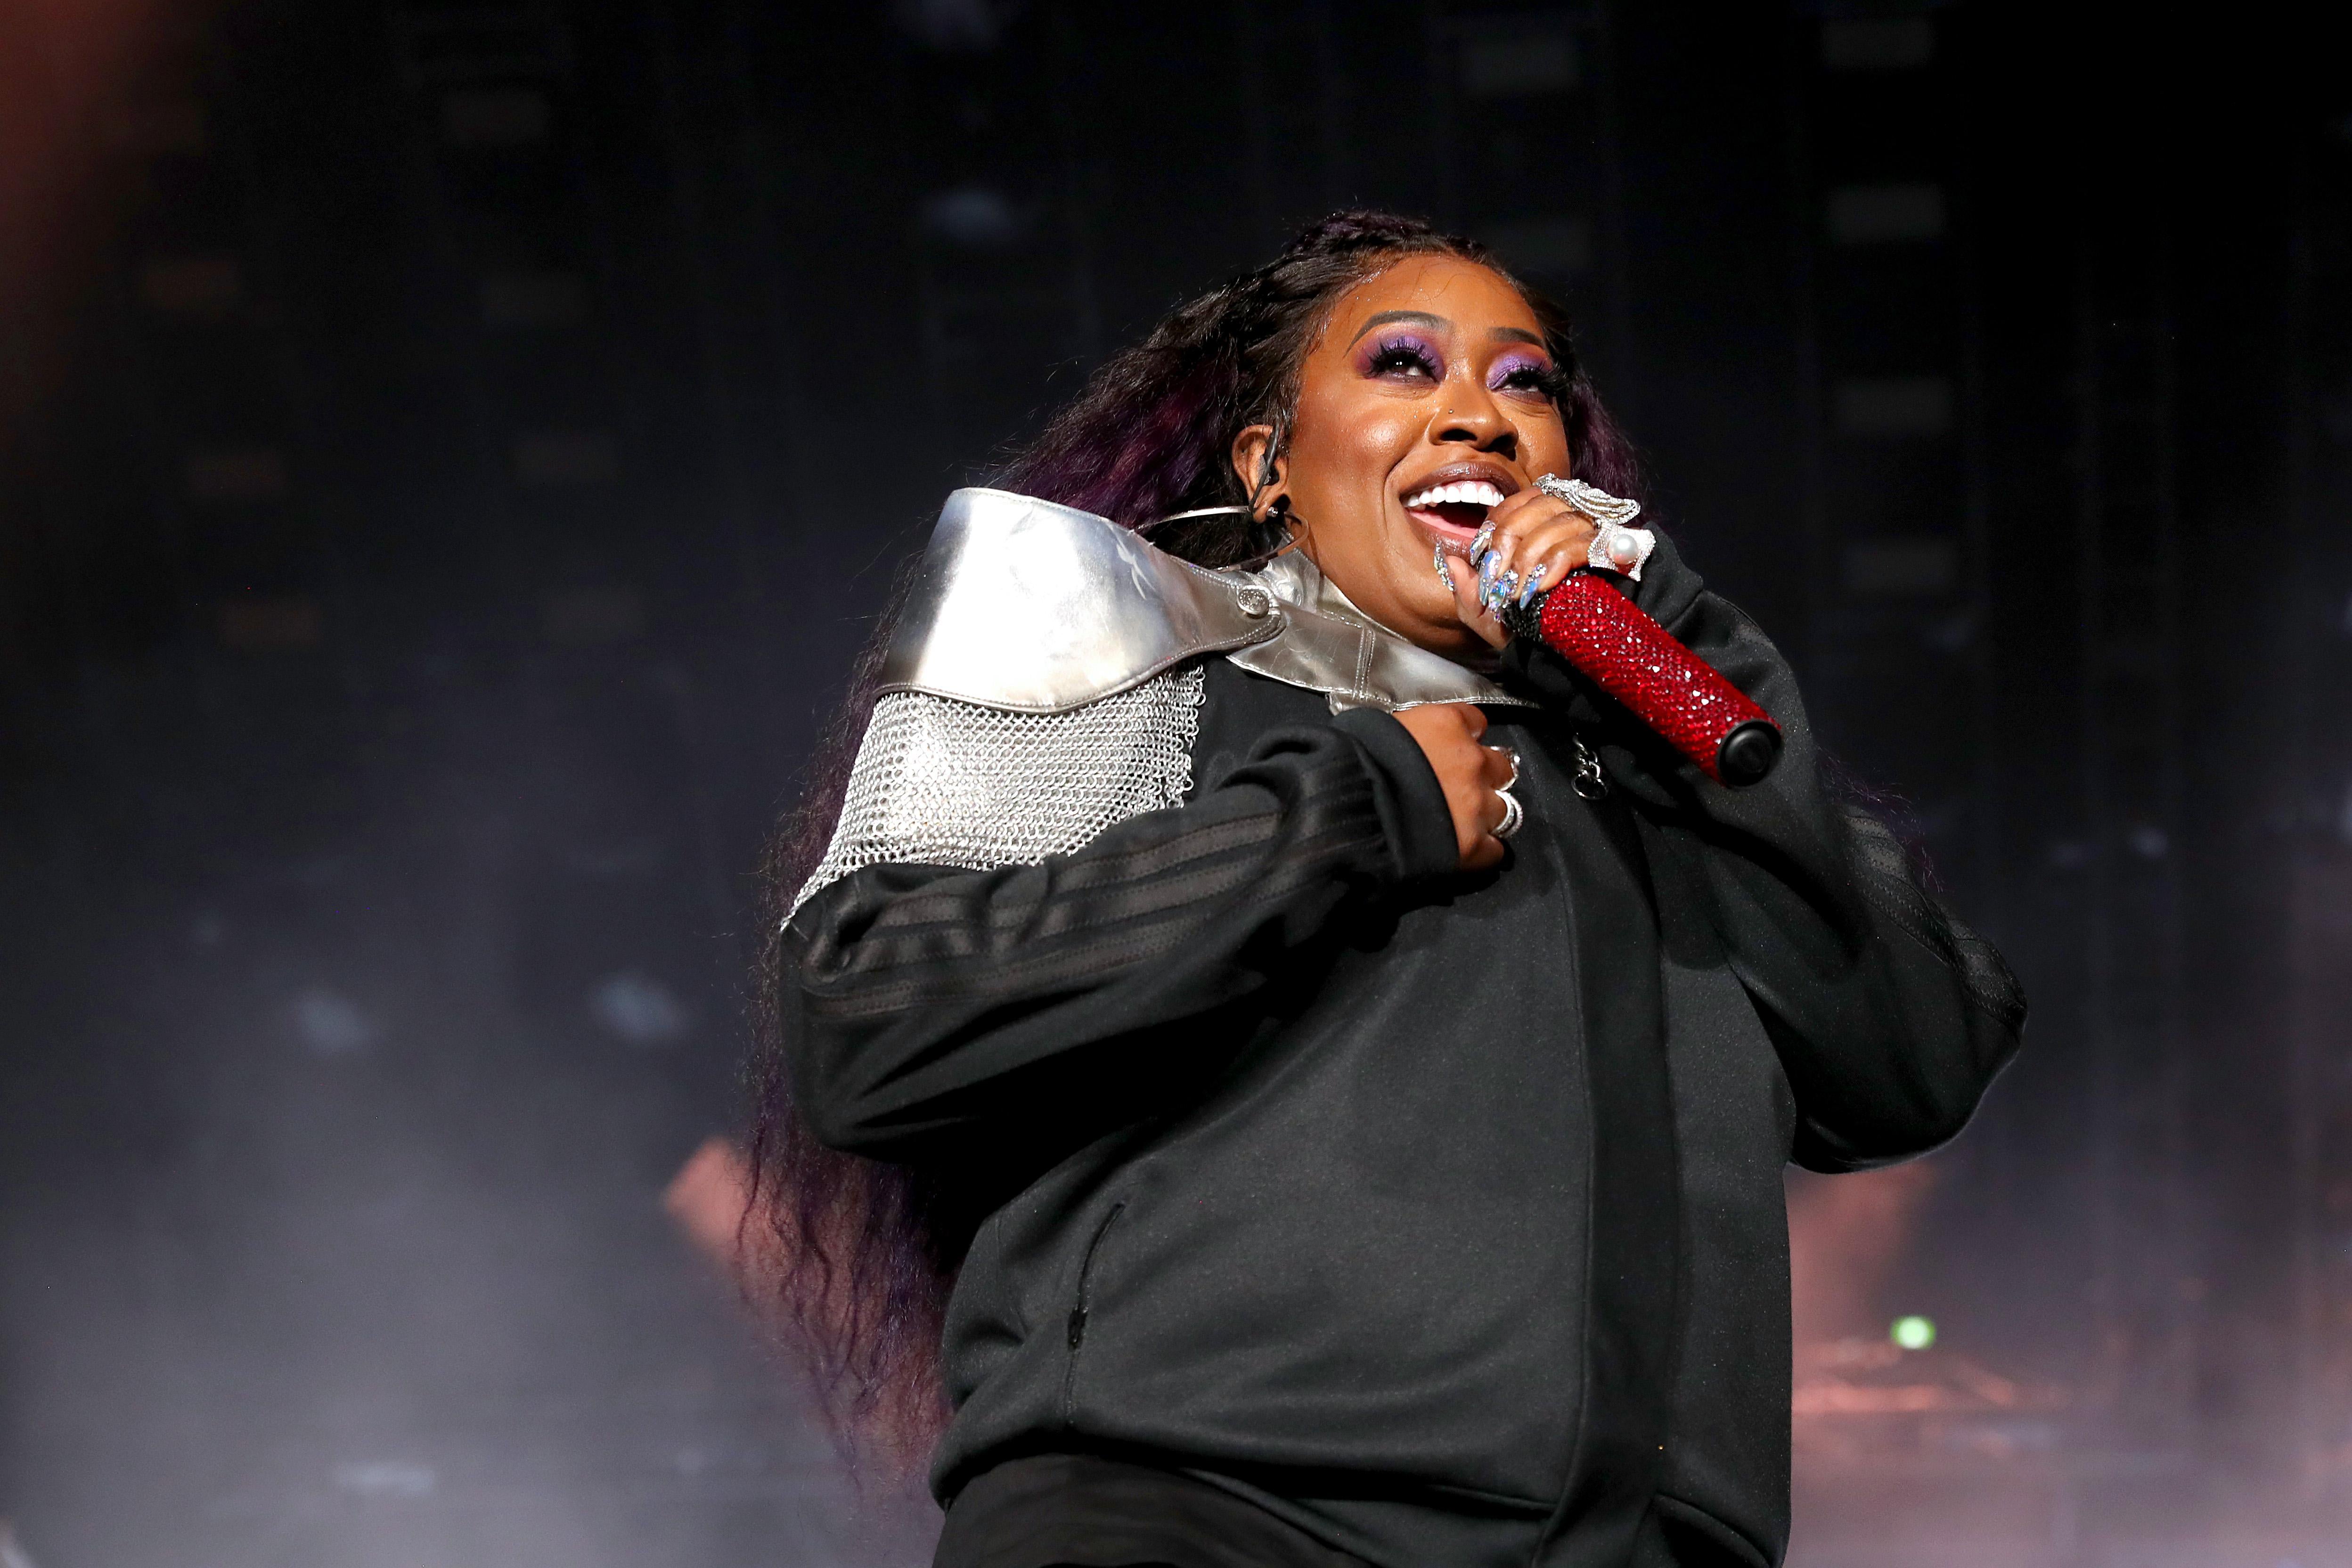 NEW ORLEANS, LOUISIANA - JULY 05: Missy Elliott performs onstage during the 2019 ESSENCE Festival Presented By Coca-Cola performs onstage during the  at Louisiana Superdome on July 05, 2019 in New Orleans, Louisiana. (Photo by Bennett Raglin/Getty Images for ESSENCE)